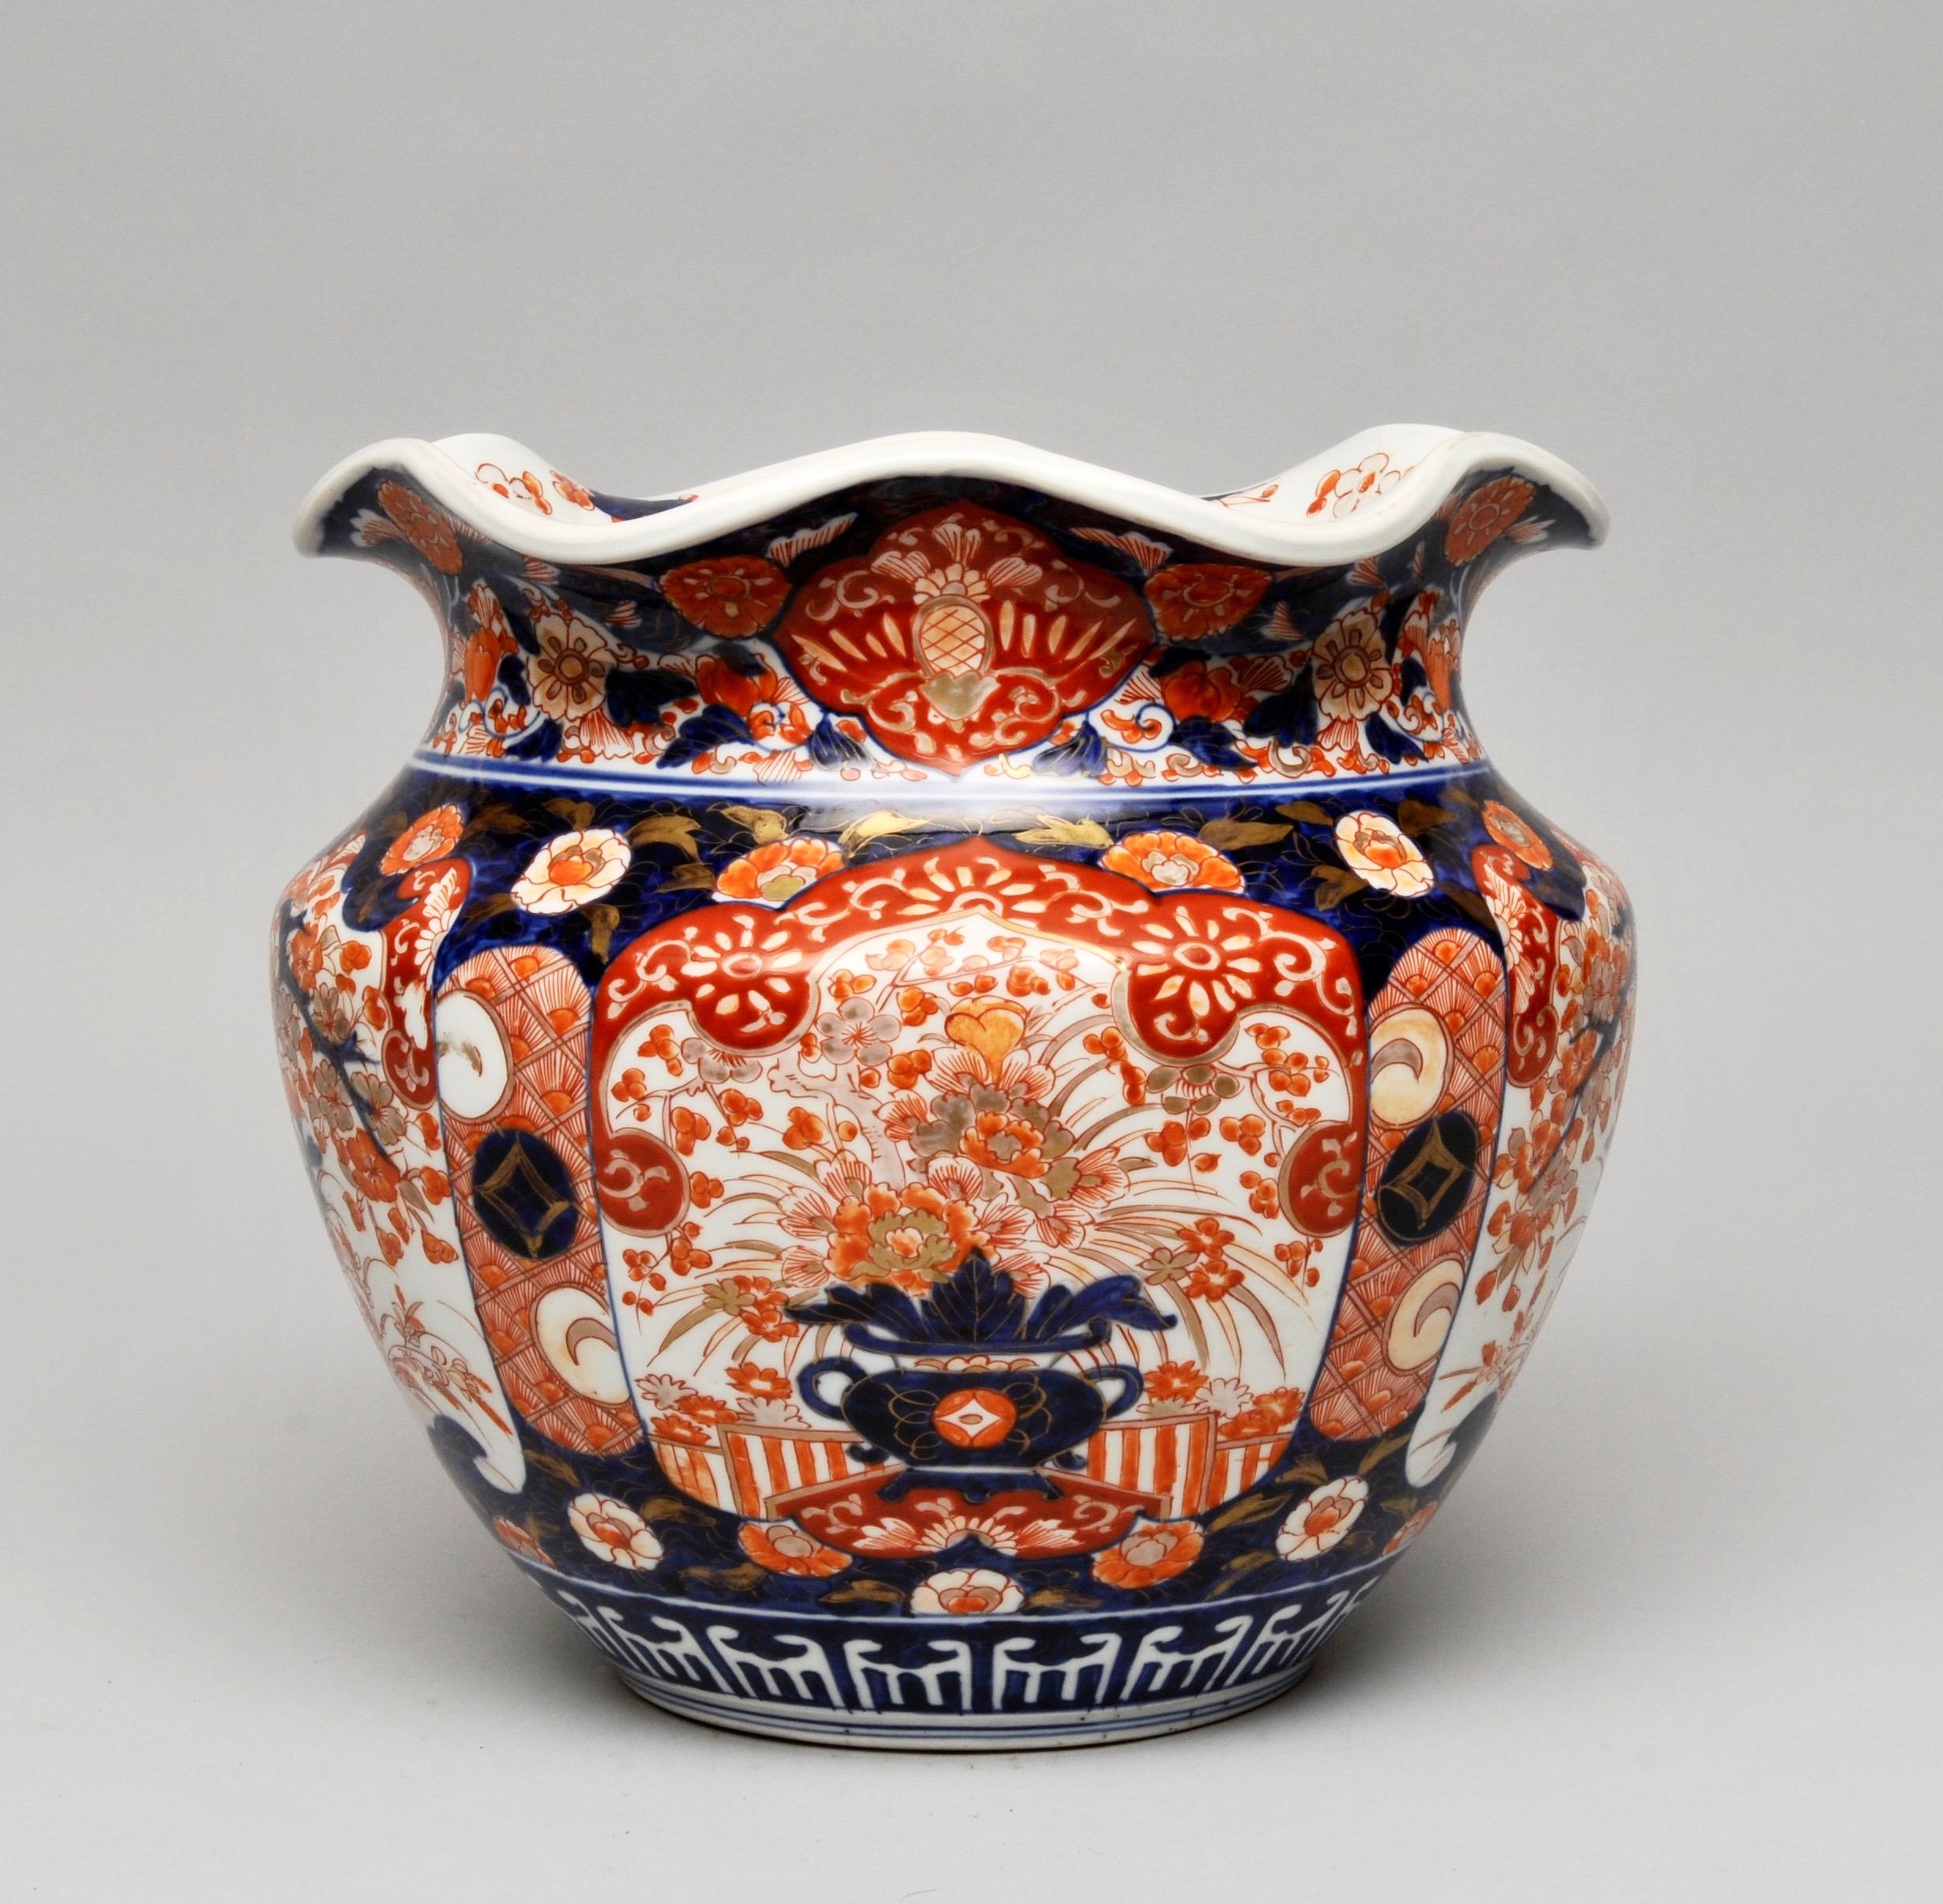 Japanese Imari jardinière, 19th century

Measures: H 25cm, D 26cm 

Imari porcelain is the name for Japanese porcelain wares made in the town of Arita, in the former Hizen Province, northwestern Kyushu. They were exported to Europe extensively